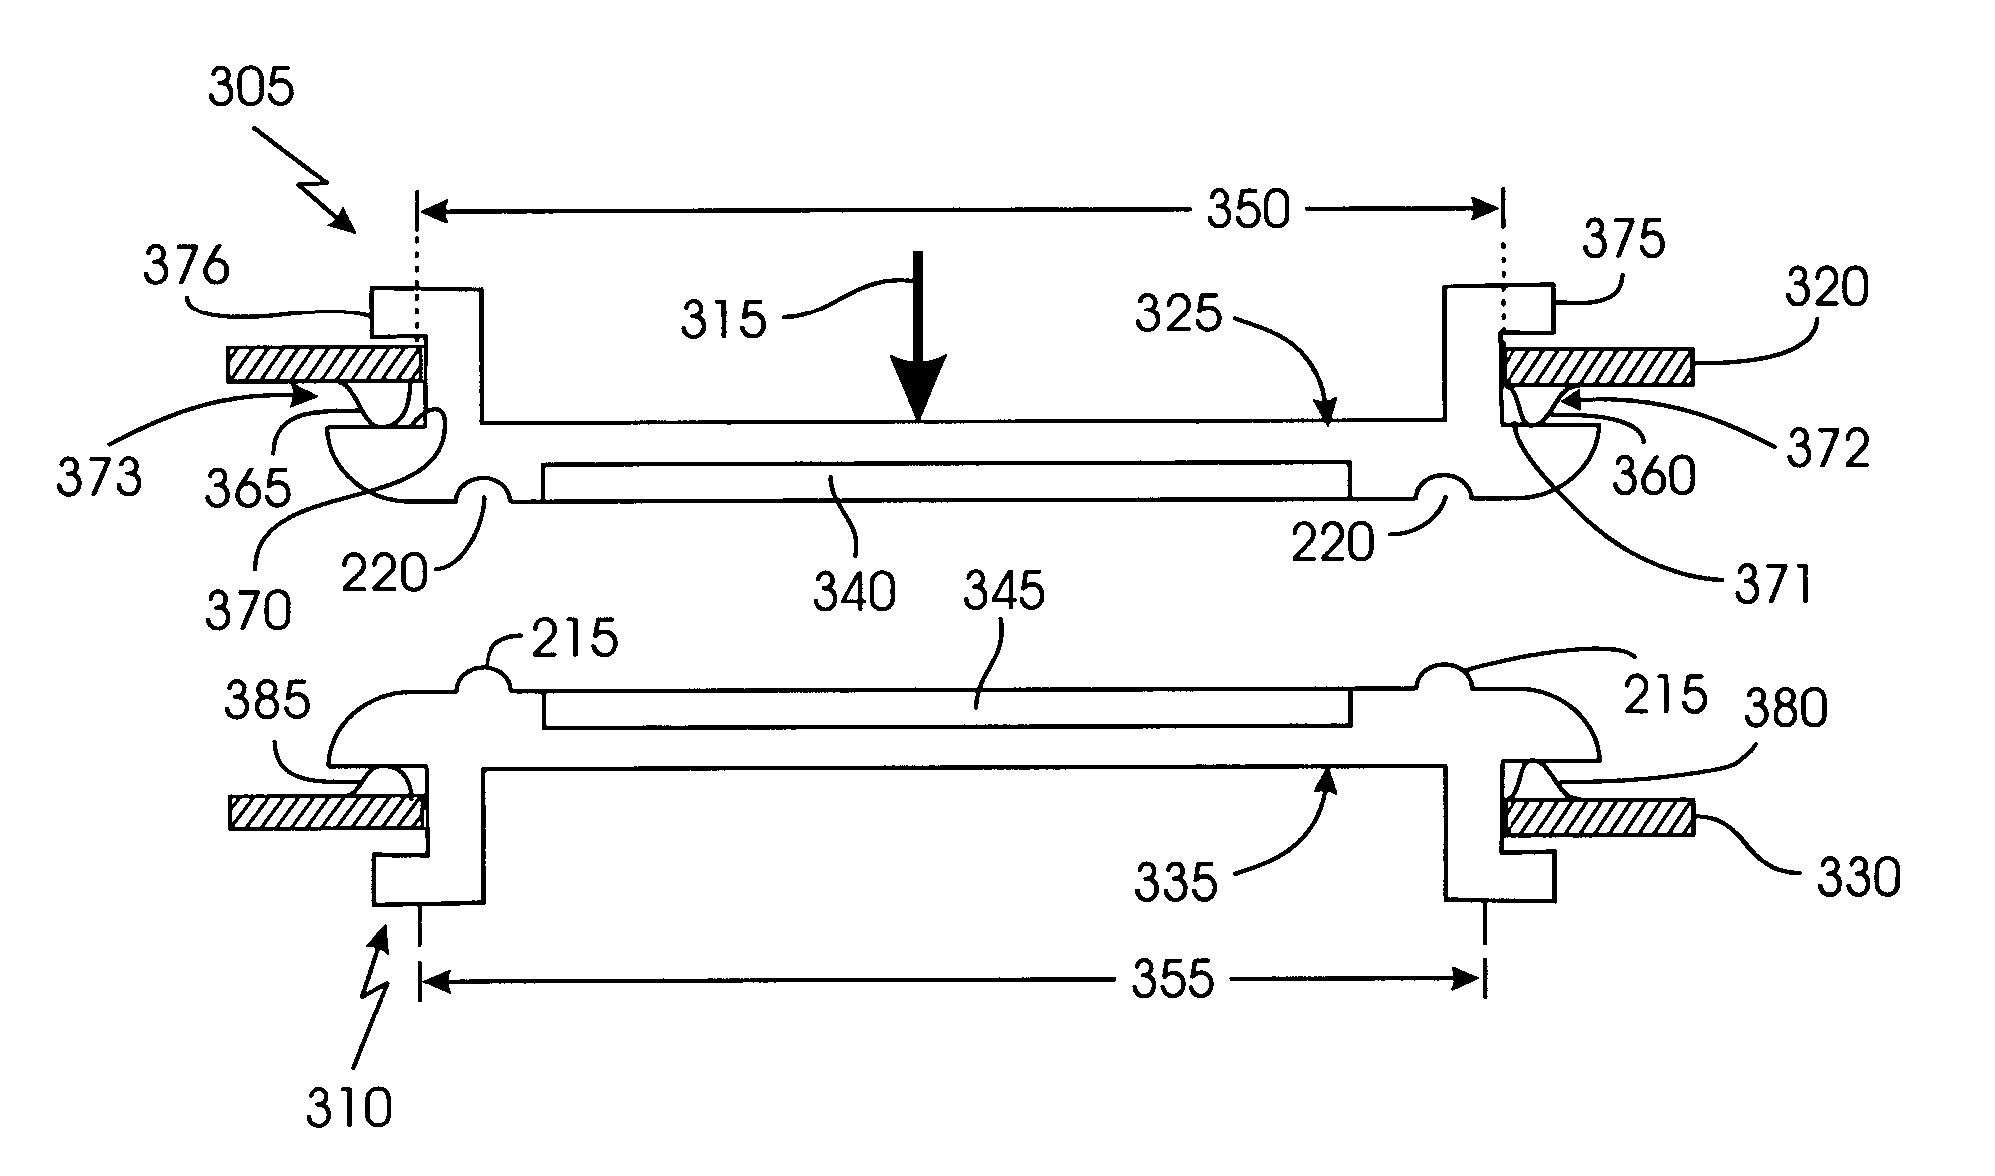 Mechanism for self-alignment of communications elements in a modular electronic system